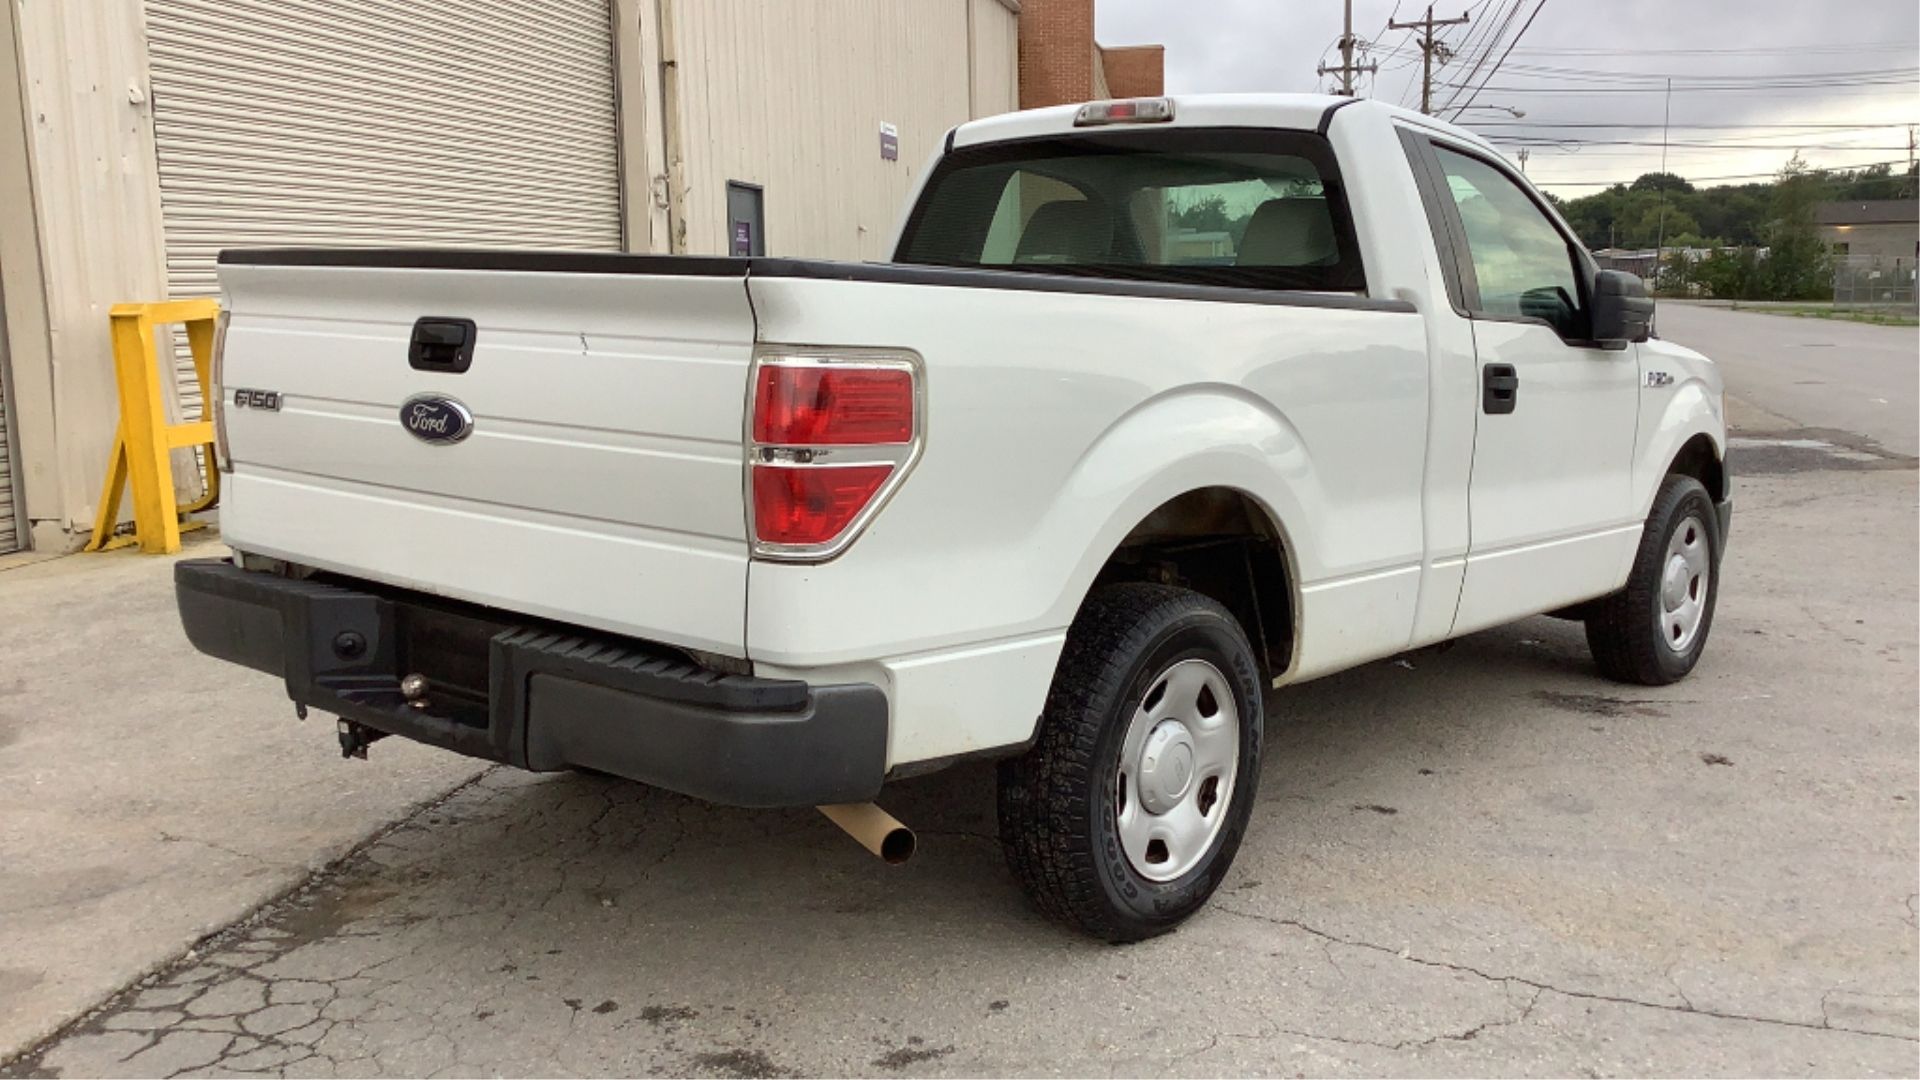 2009 Ford F-150 Regular Cab XL 2WD - Image 20 of 71